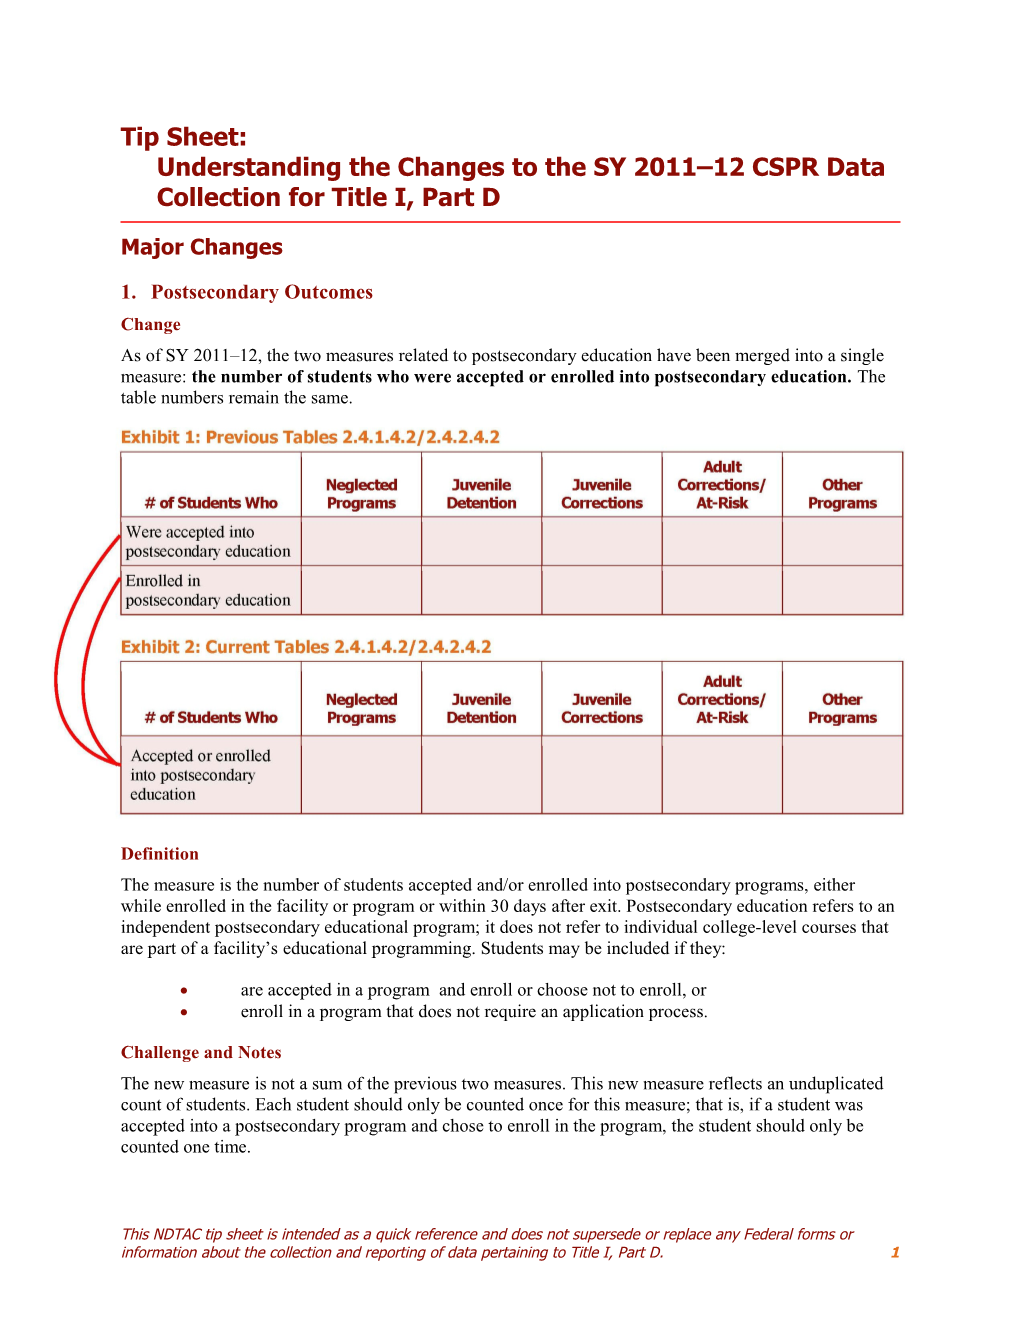 Tip Sheet: Understanding the Changes to the SY 2011 12 CSPR Data Collection for Title I, Part D